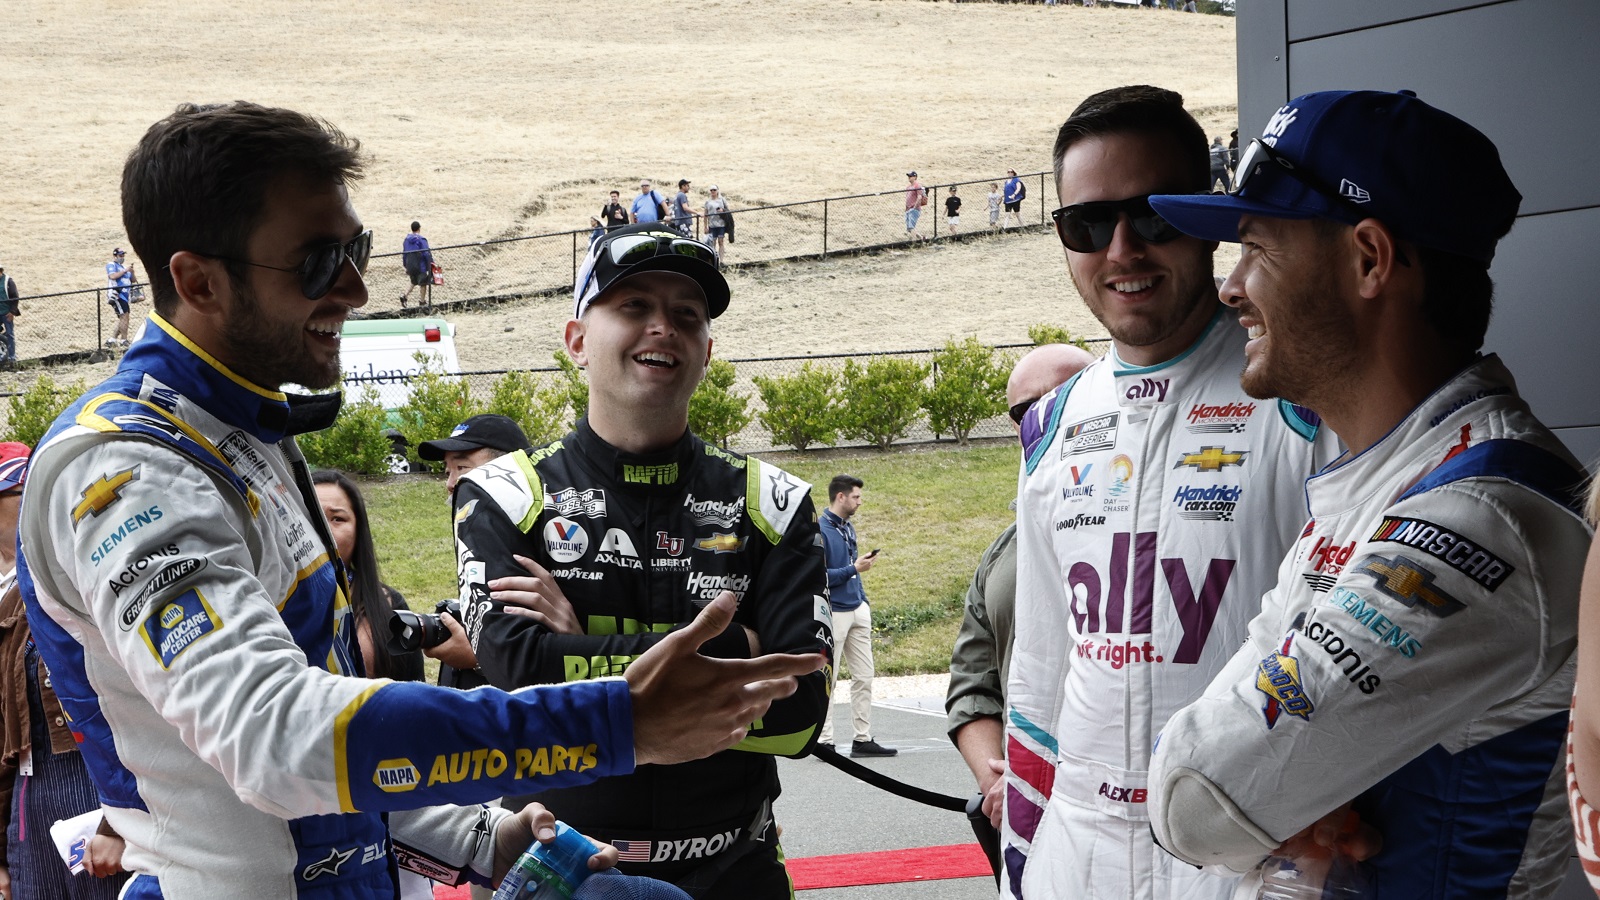 Chase Elliott, William Byron, Alex Bowman, and Kyle Larson of Hendrick Motorsports share a laugh at the 1948 Club prior to the NASCAR Cup Series Toyota/Save Mart 350 at Sonoma Raceway on June 12, 2022.